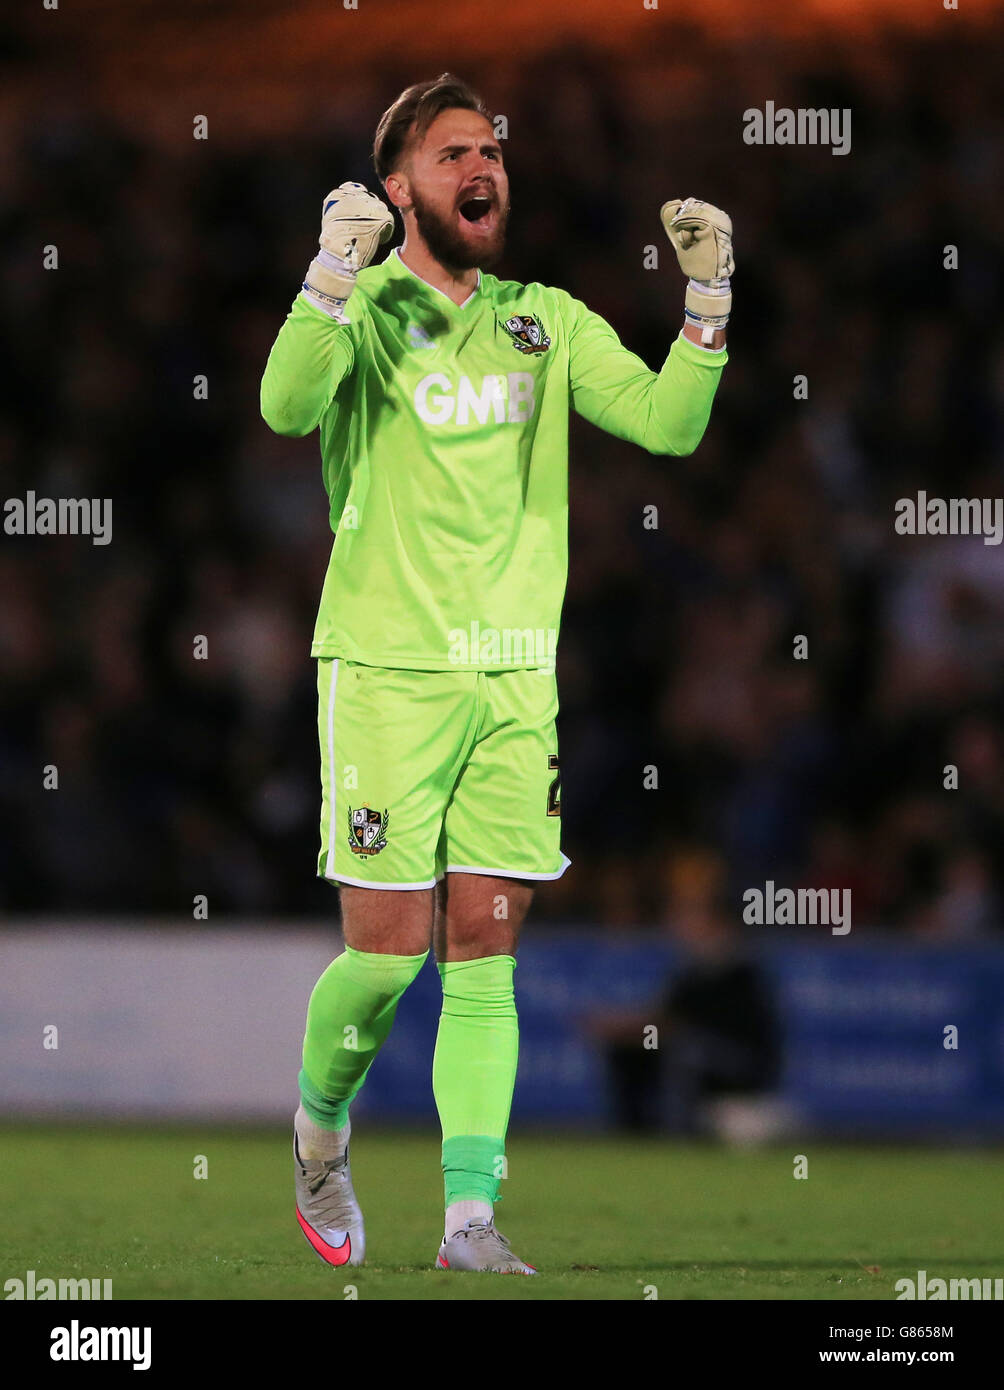 Port Vale goalkeeper Jak Alnwick celebrates his side's first goal of the game, during the Capital One Cup, First Round match at Vale Park, Stoke-on-Trent. Stock Photo